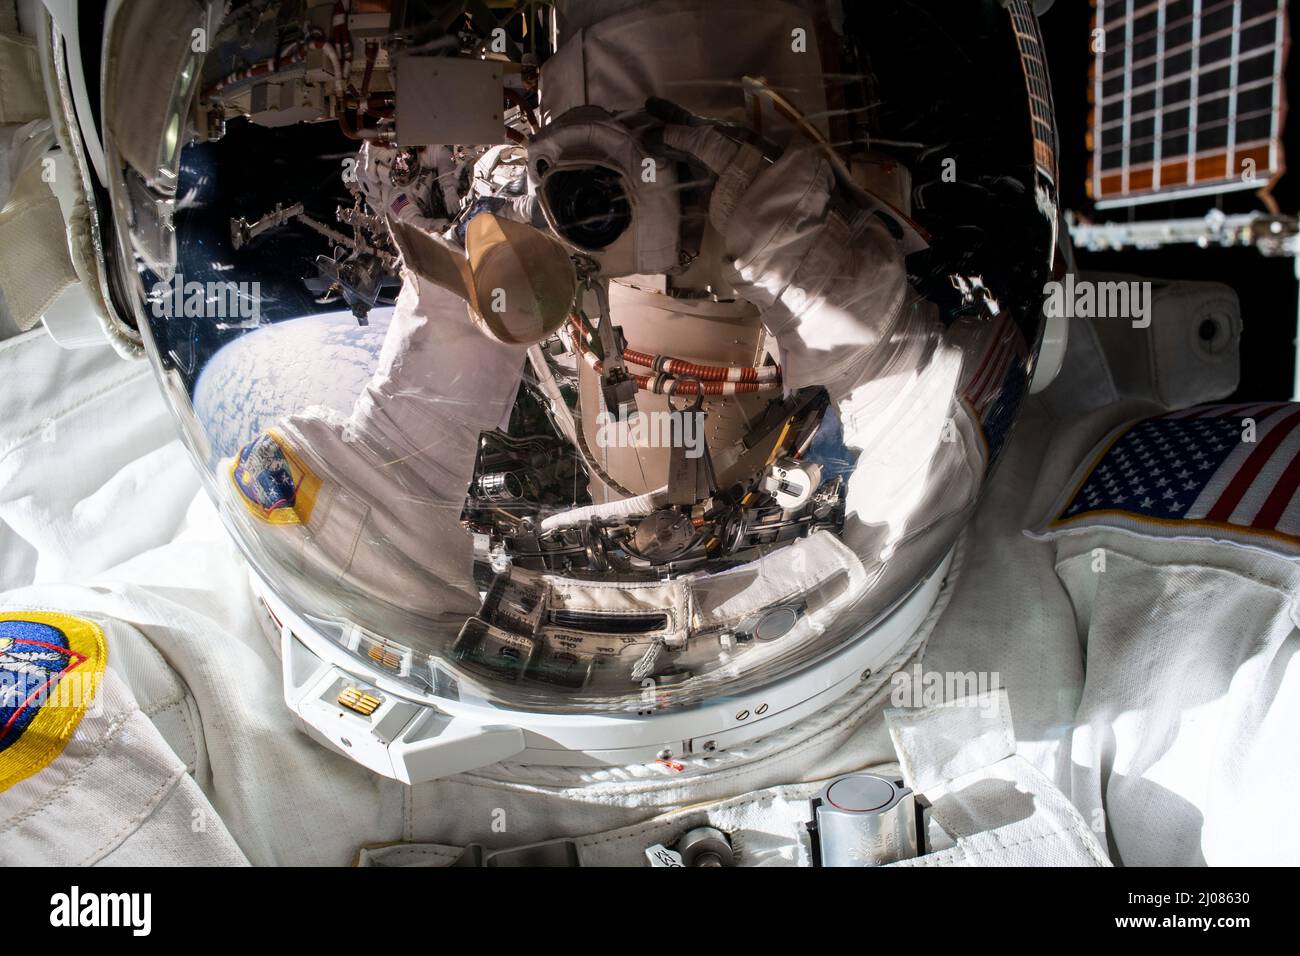 International Space Station, Earth Orbit. 15th Mar, 2022. International Space Station, EARTH ORBIT. 15 March, 2022. NASA astronaut Kayla Barron, takes a selfie, reflected by her helmet visor during a nearly 7 hour long spacewalk to prepare the International Space Station for the next roll-out solar array, March 15, 2022 in Earth Orbit. Credit: NASA/NASA/Alamy Live News Stock Photo